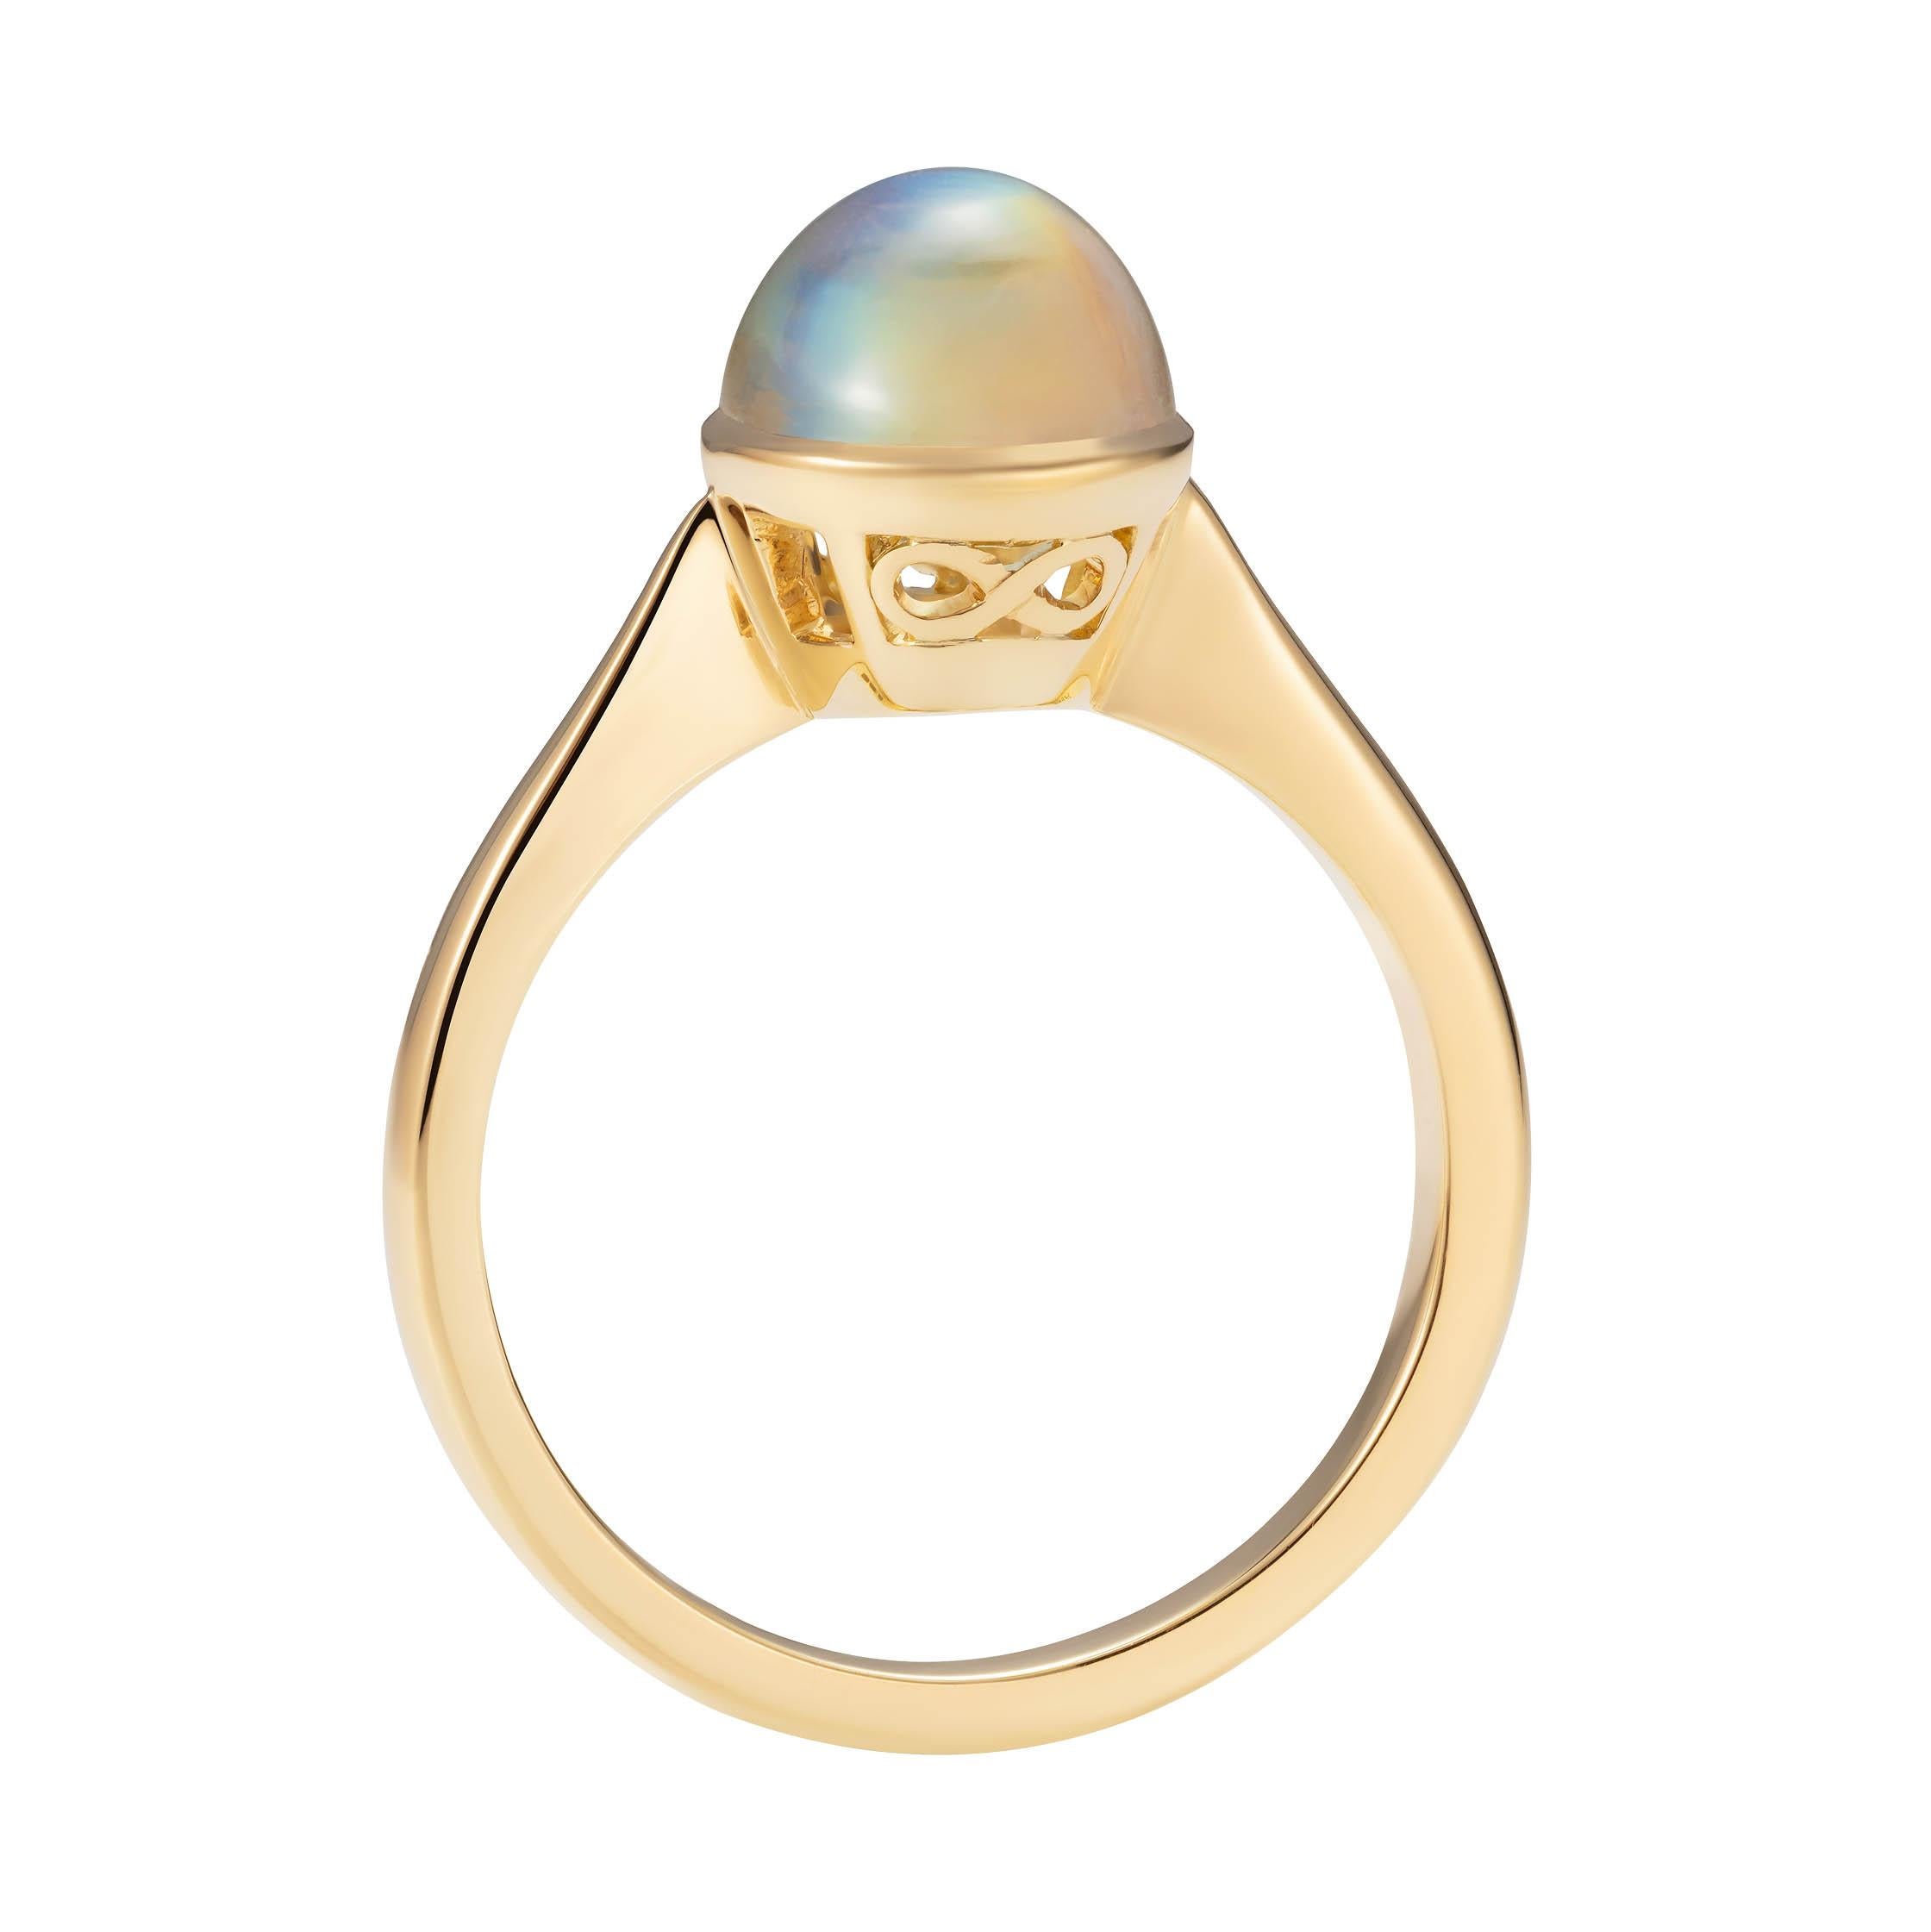 A beautiful rainbow moonstone showing a variety of colours from blue to pink and even soft yellows set in our Venus setting with our infinity mark on the side.

- 1 rainbow moonstone weighing 3.63 carats
- Created in 18K yellow gold, handmade in